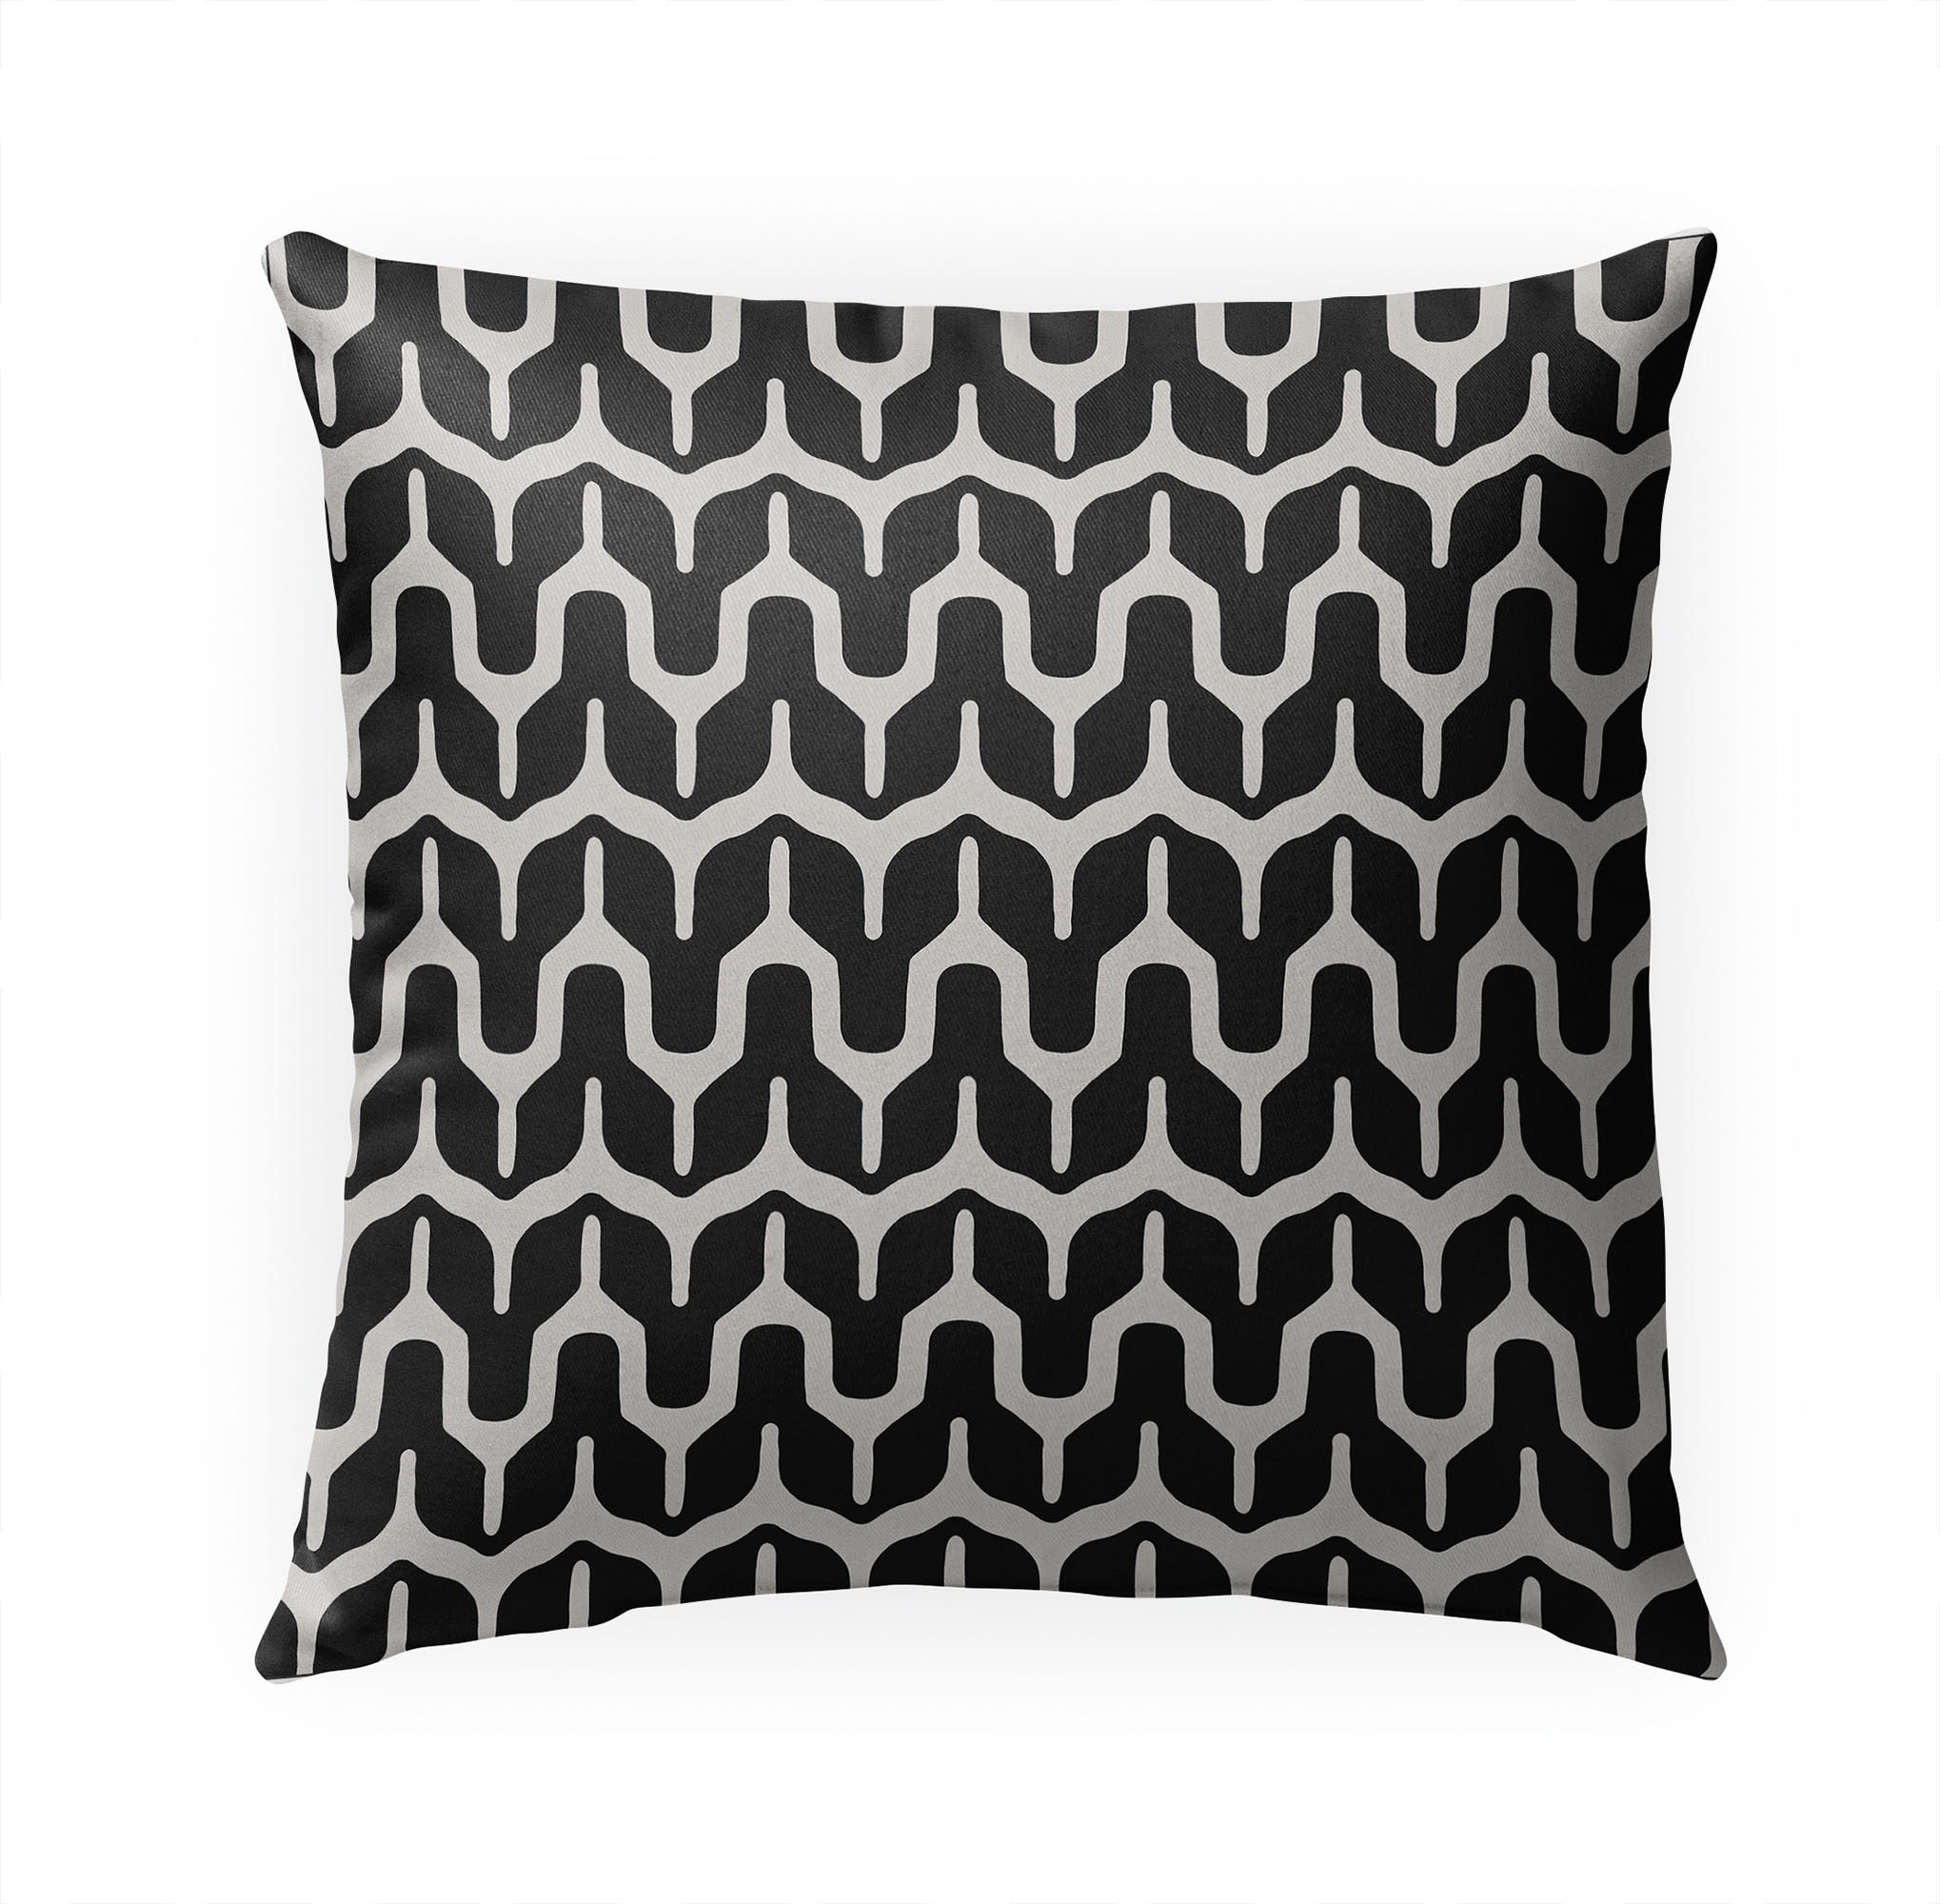 Maria Black and Beige Outdoor Pillow by Kavka Designs - image 1 of 5